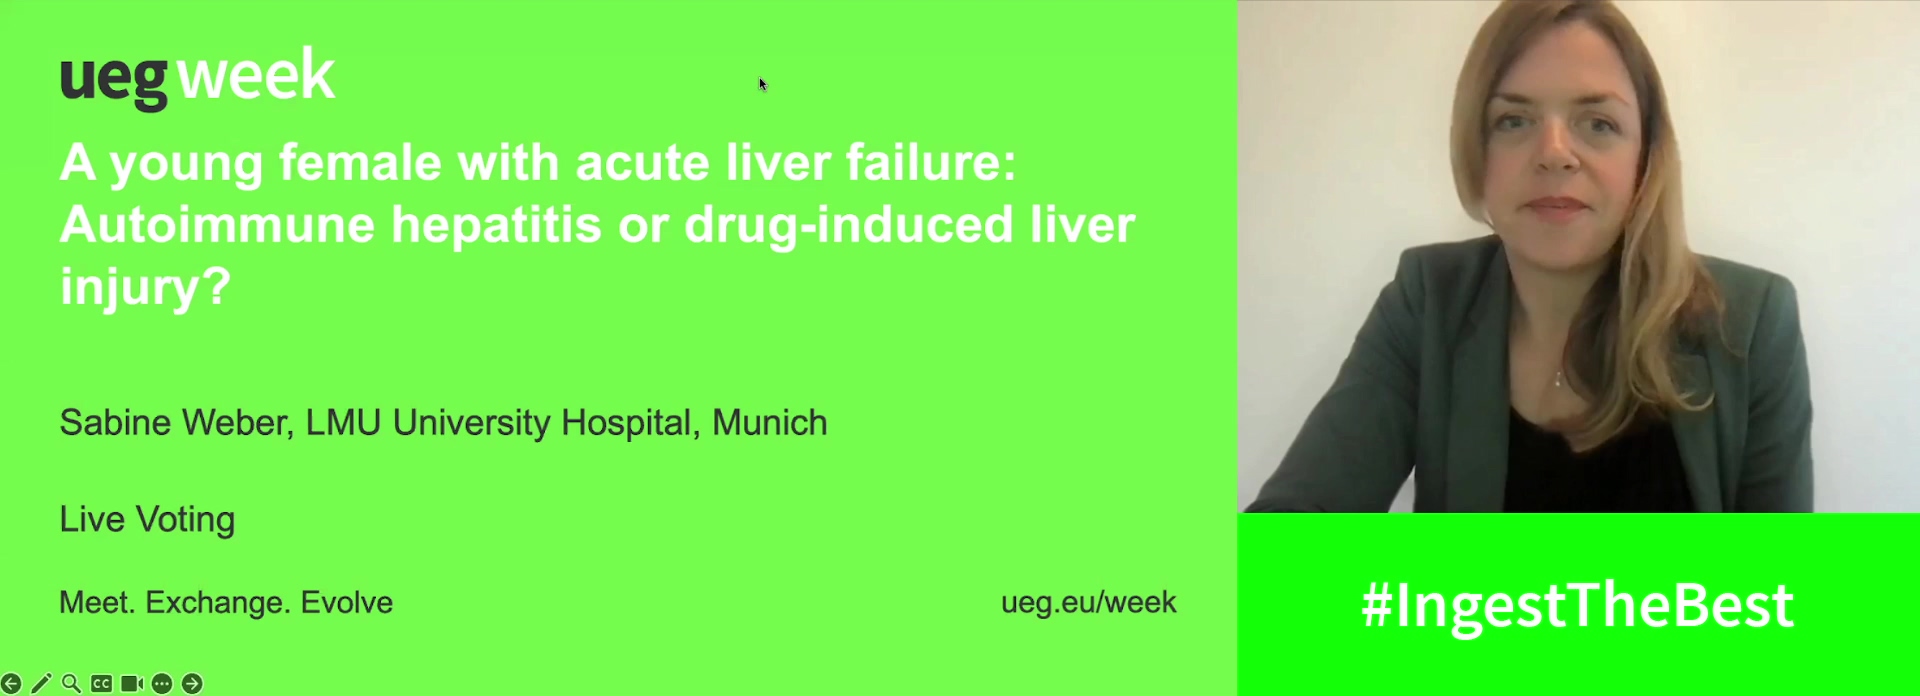 A young female with acute liver failure: Autoimmune hepatitis or drug-induced liver injury?